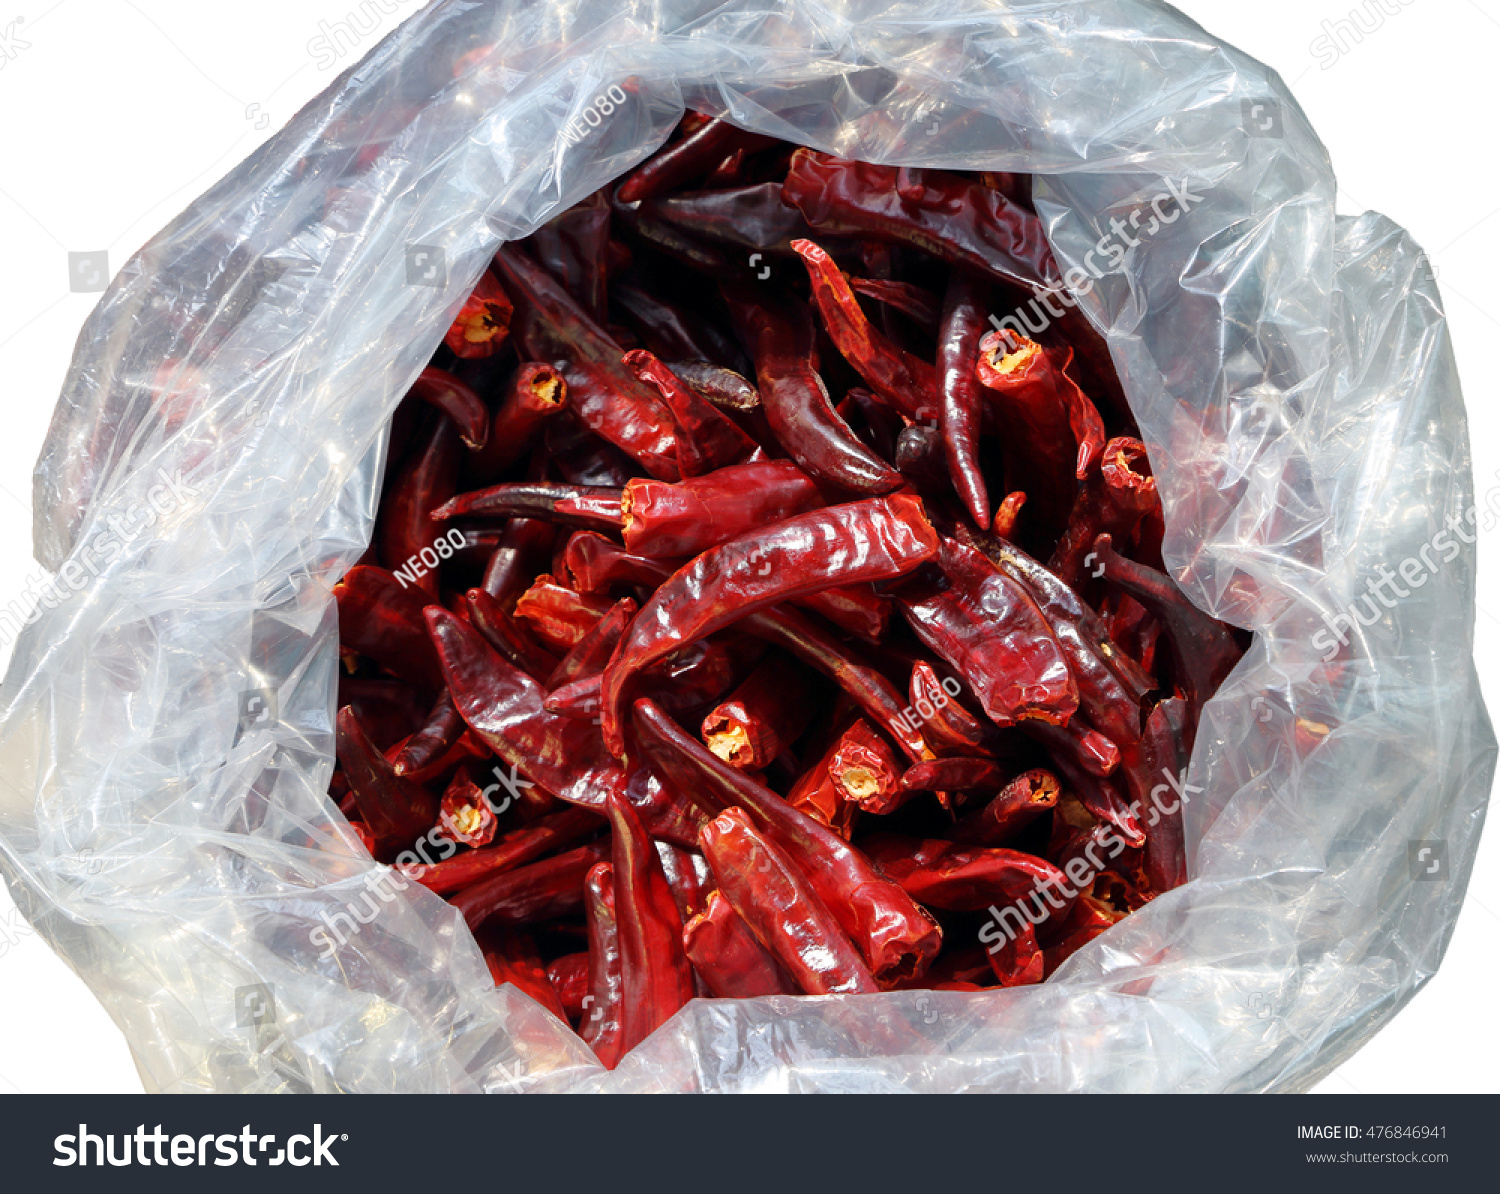 Download Plastic Bag With Red Chili Peppers / Plastic Bag With Colored Sweet Peppers Mockup Designs Zone ...